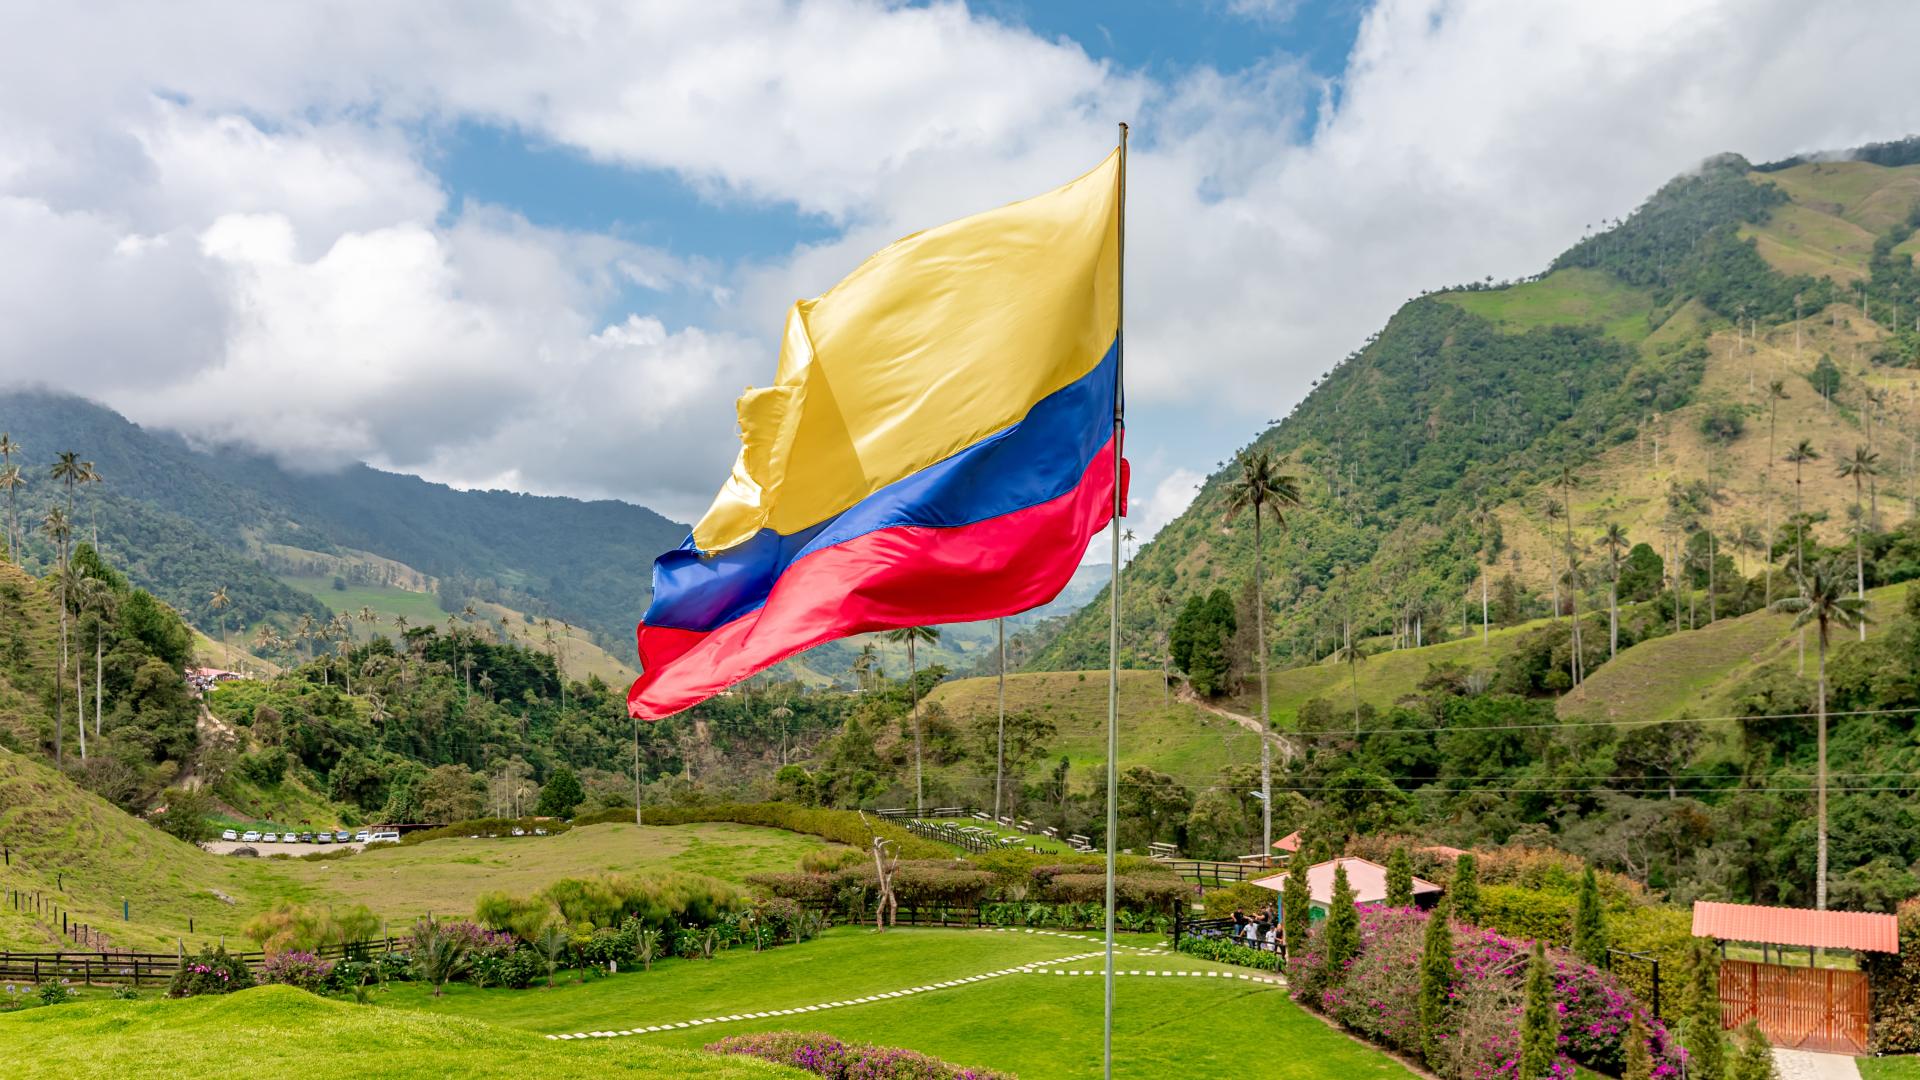 Let's celebrate the freedom that unites us, Colombia!